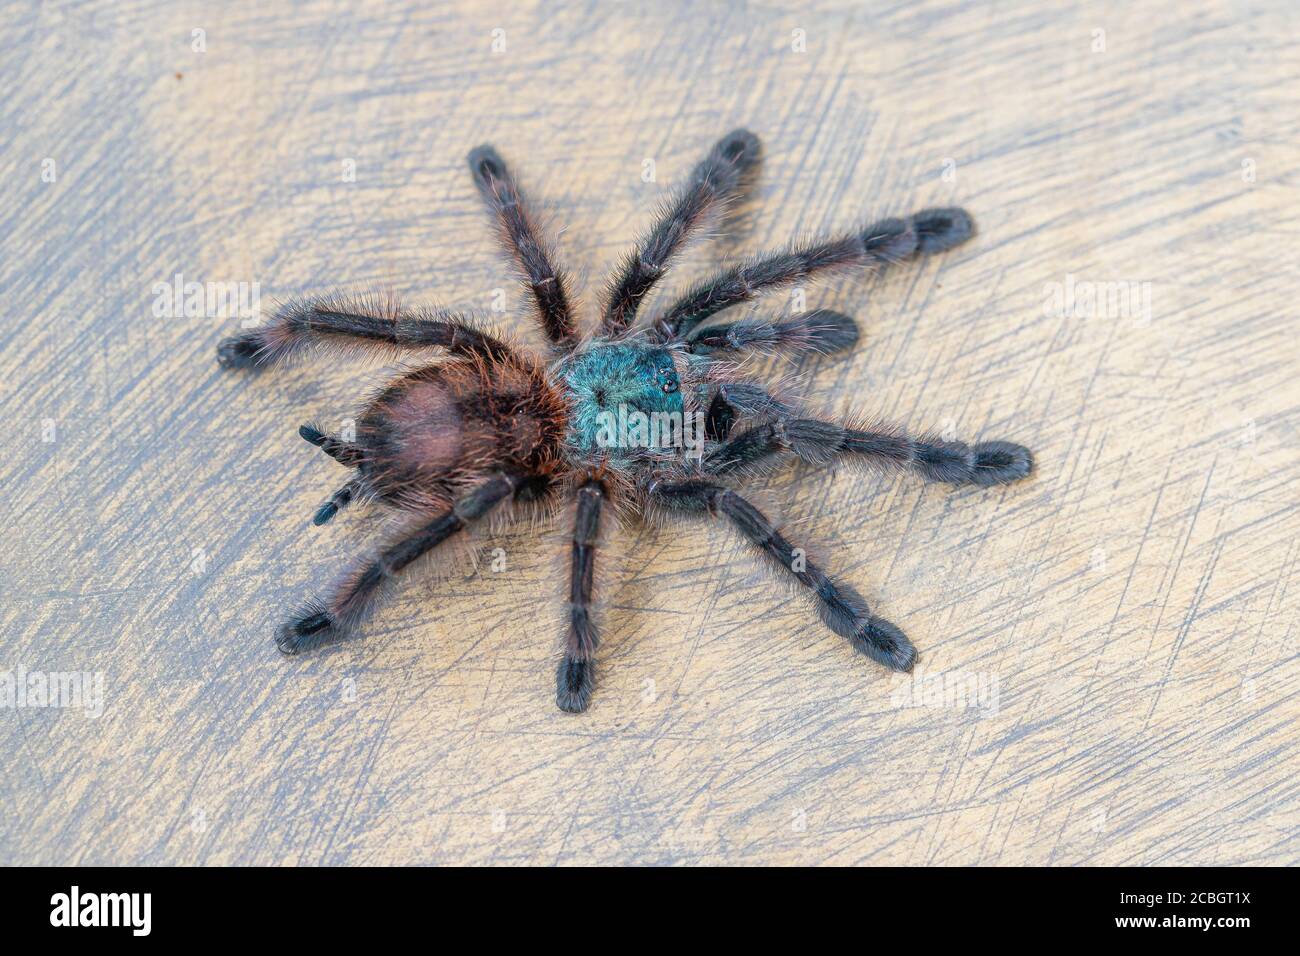 Avicularia versicolor spider standing on wooden background. Close up, top view, , wallpaper, poster Stock Photo